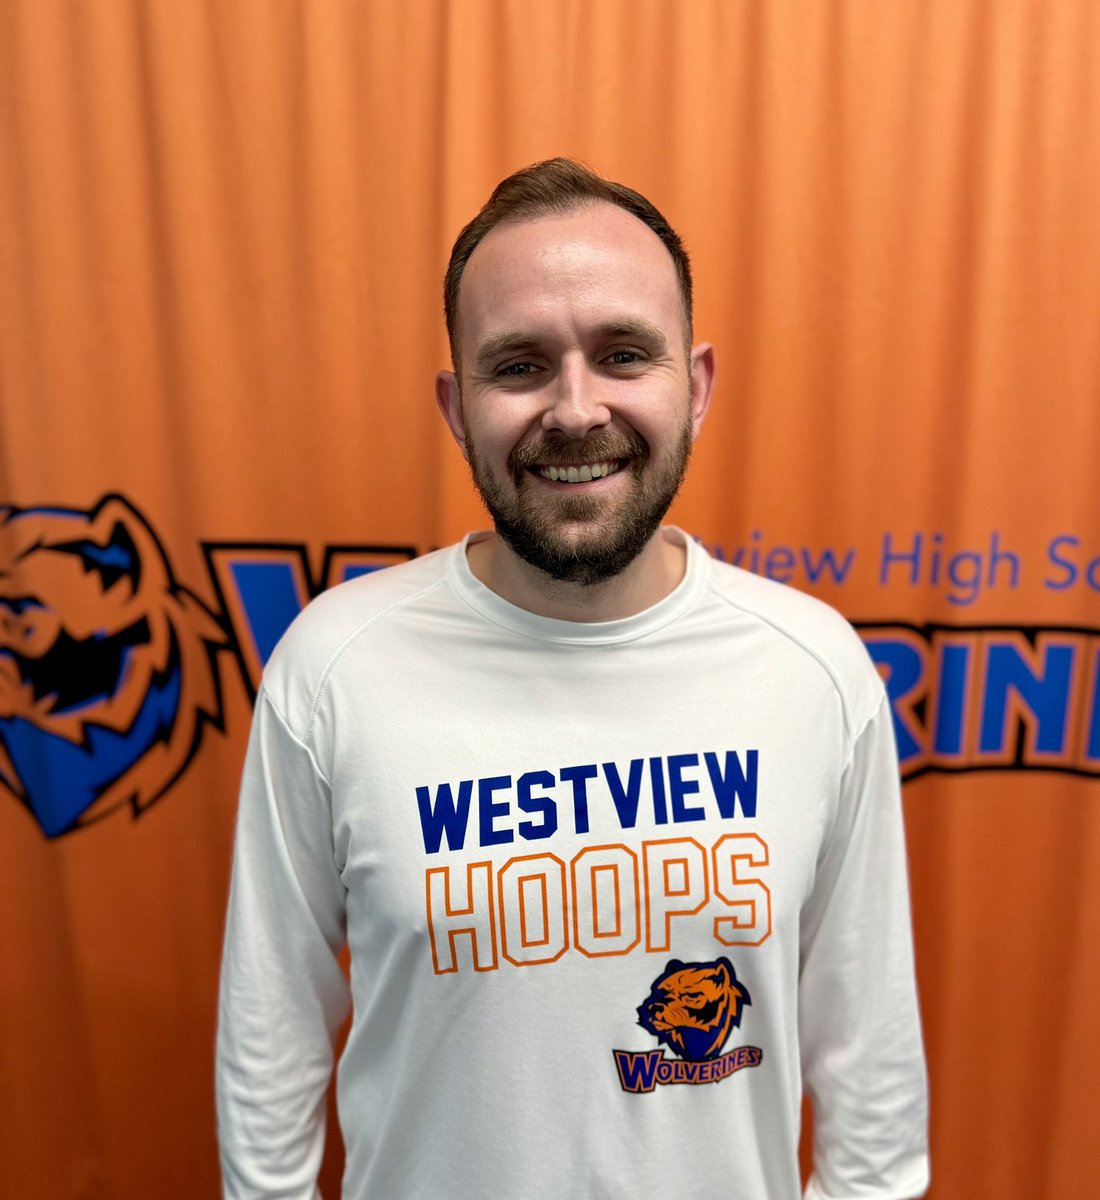 We are ecstatic to announce Patrick Freeman as our new boys basketball coach.  Mr. Freeman has been a tremendous assistant the past 2 years and earned this opportunity. We are excited to see this program continue to grow and succeed under his guidance.  Congrats Coach Freeman!